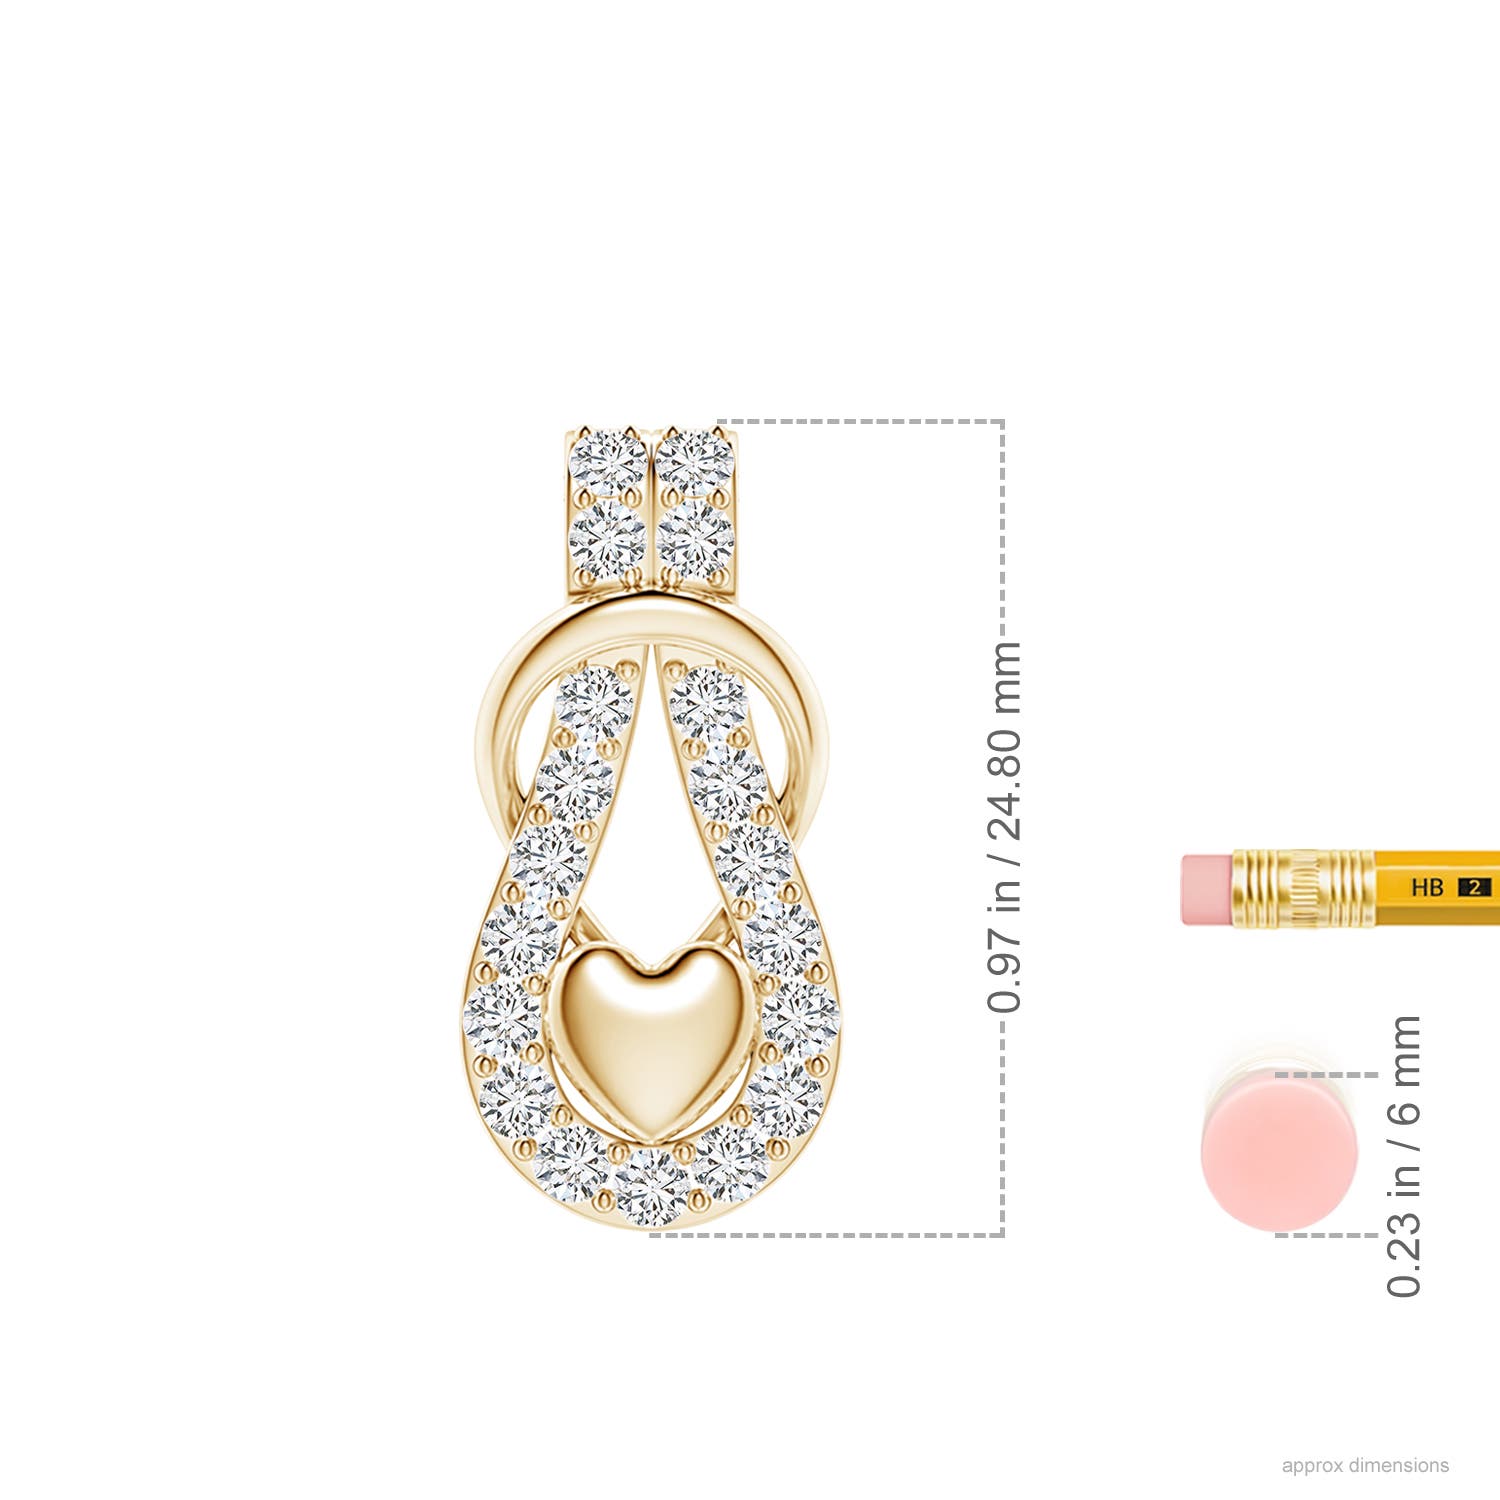 H, SI2 / 0.99 CT / 18 KT Yellow Gold